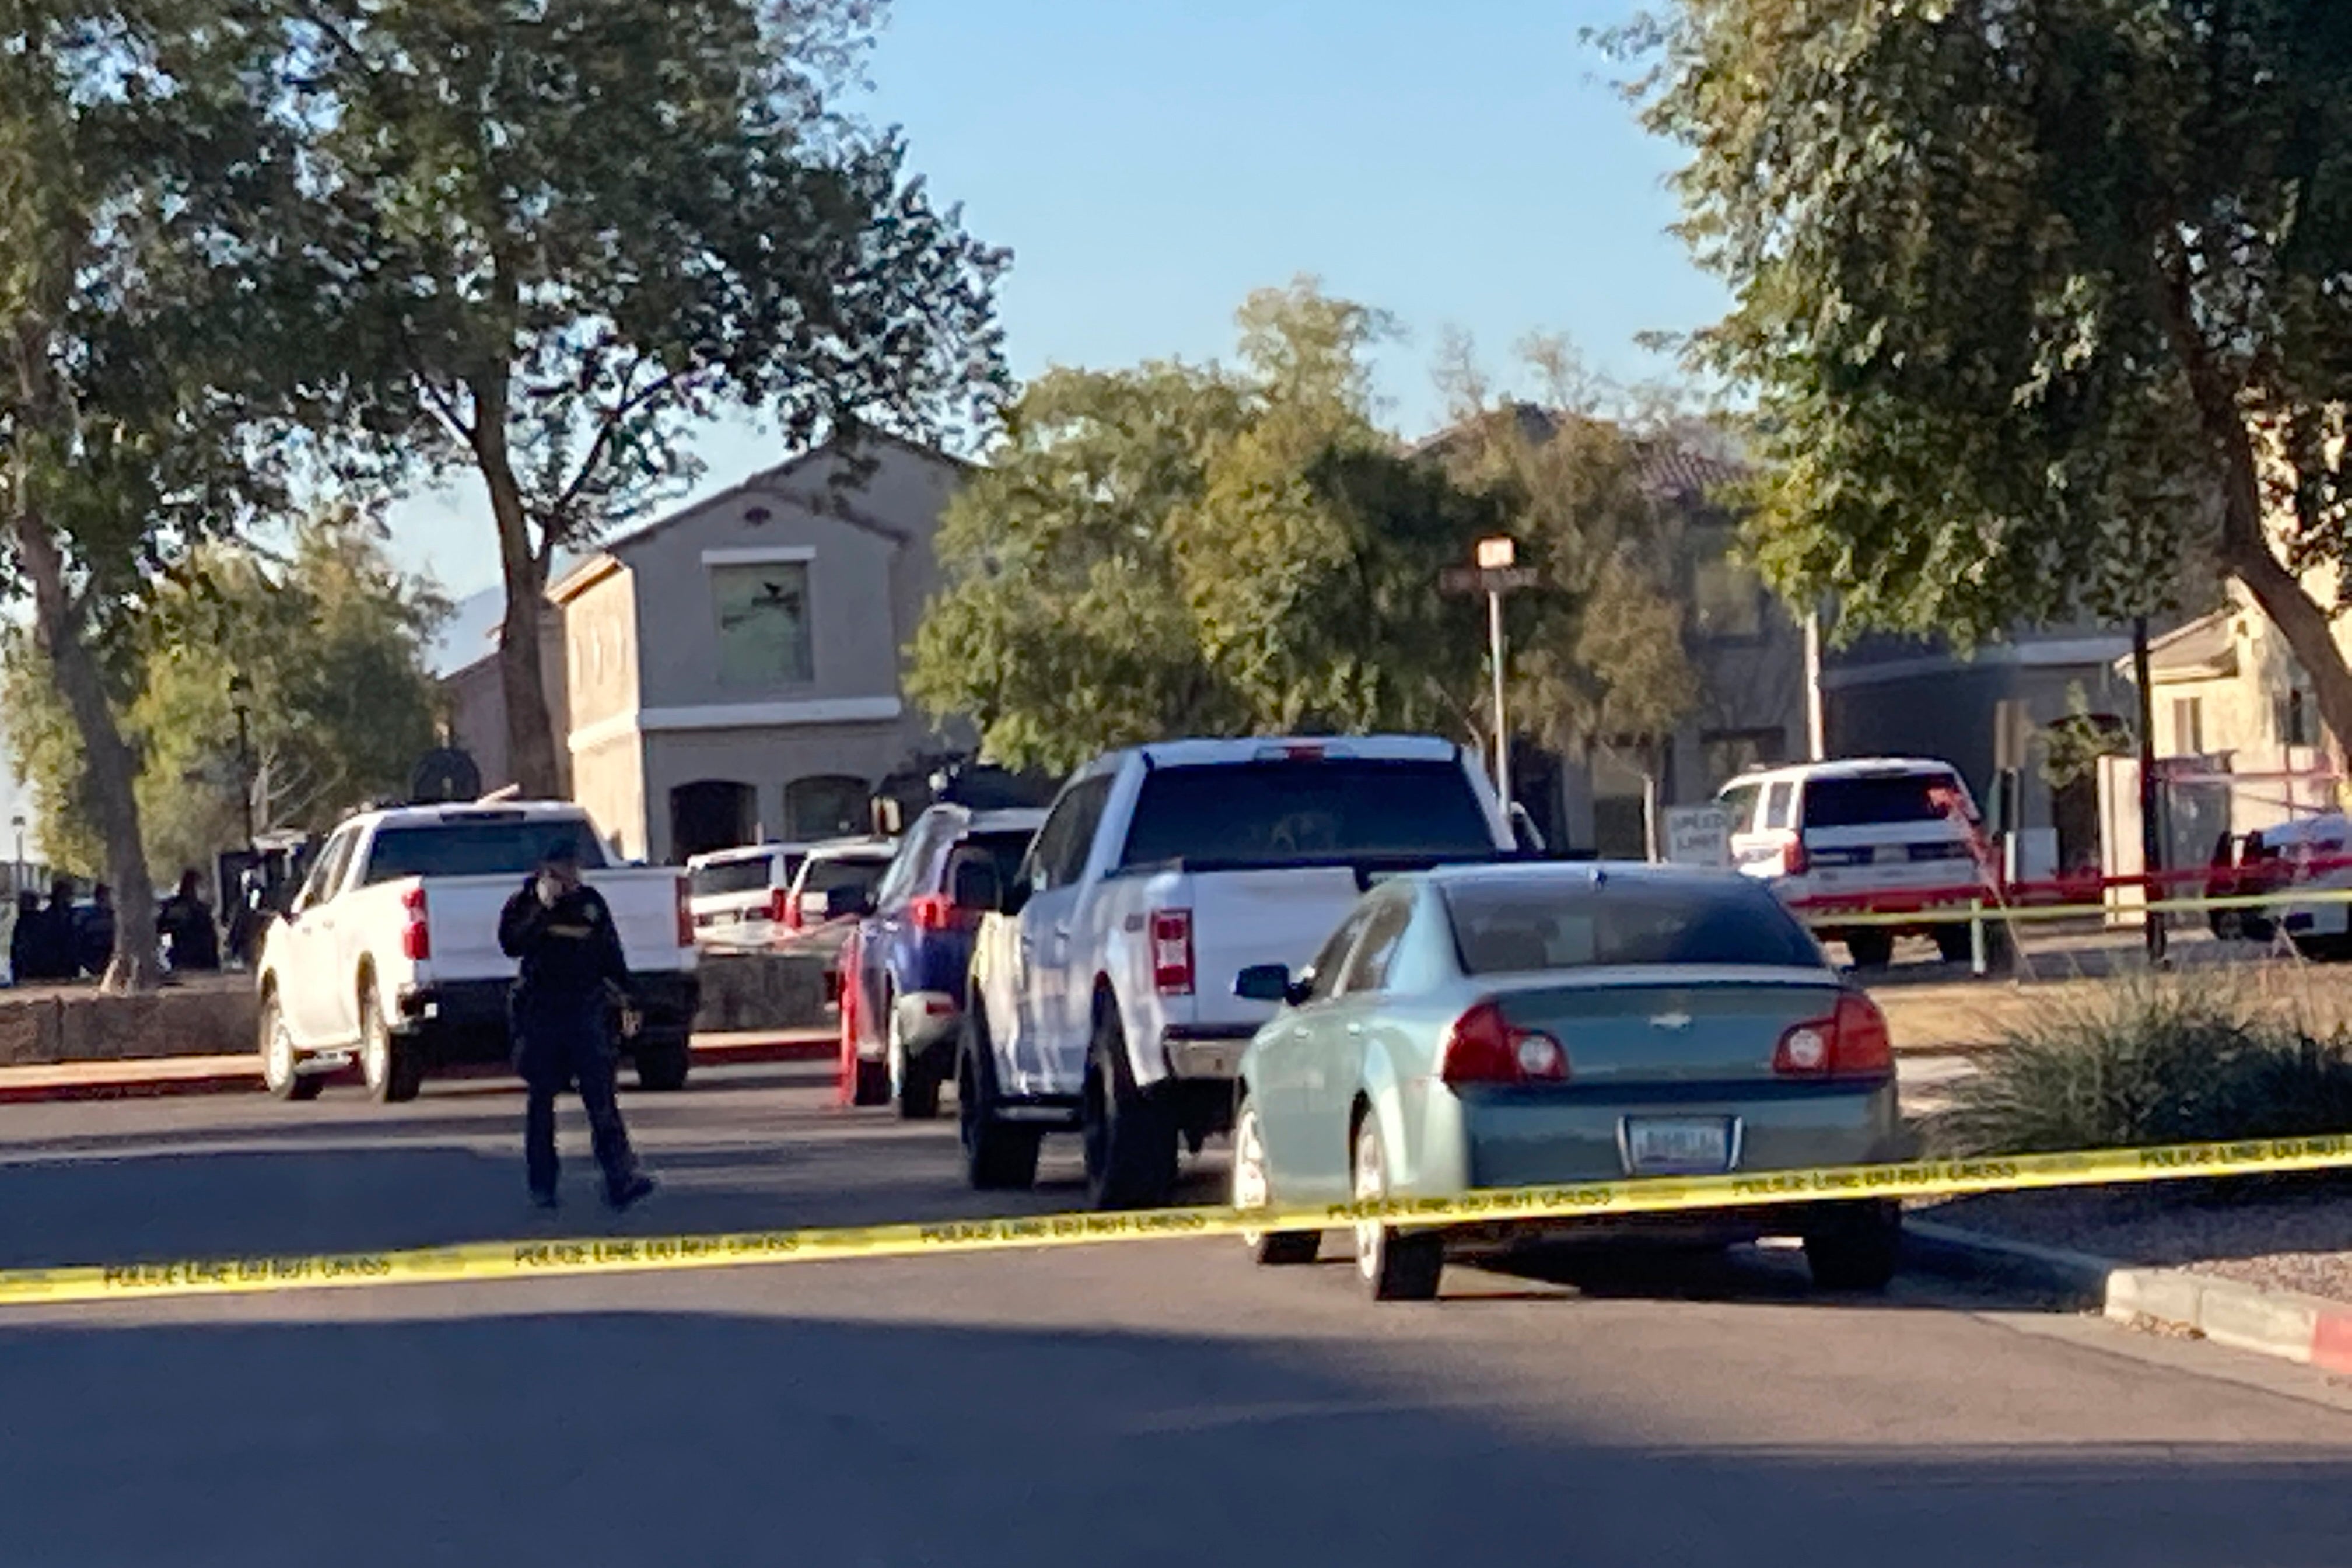 Police tape cordoning off the scene of the shootout in Phoenix